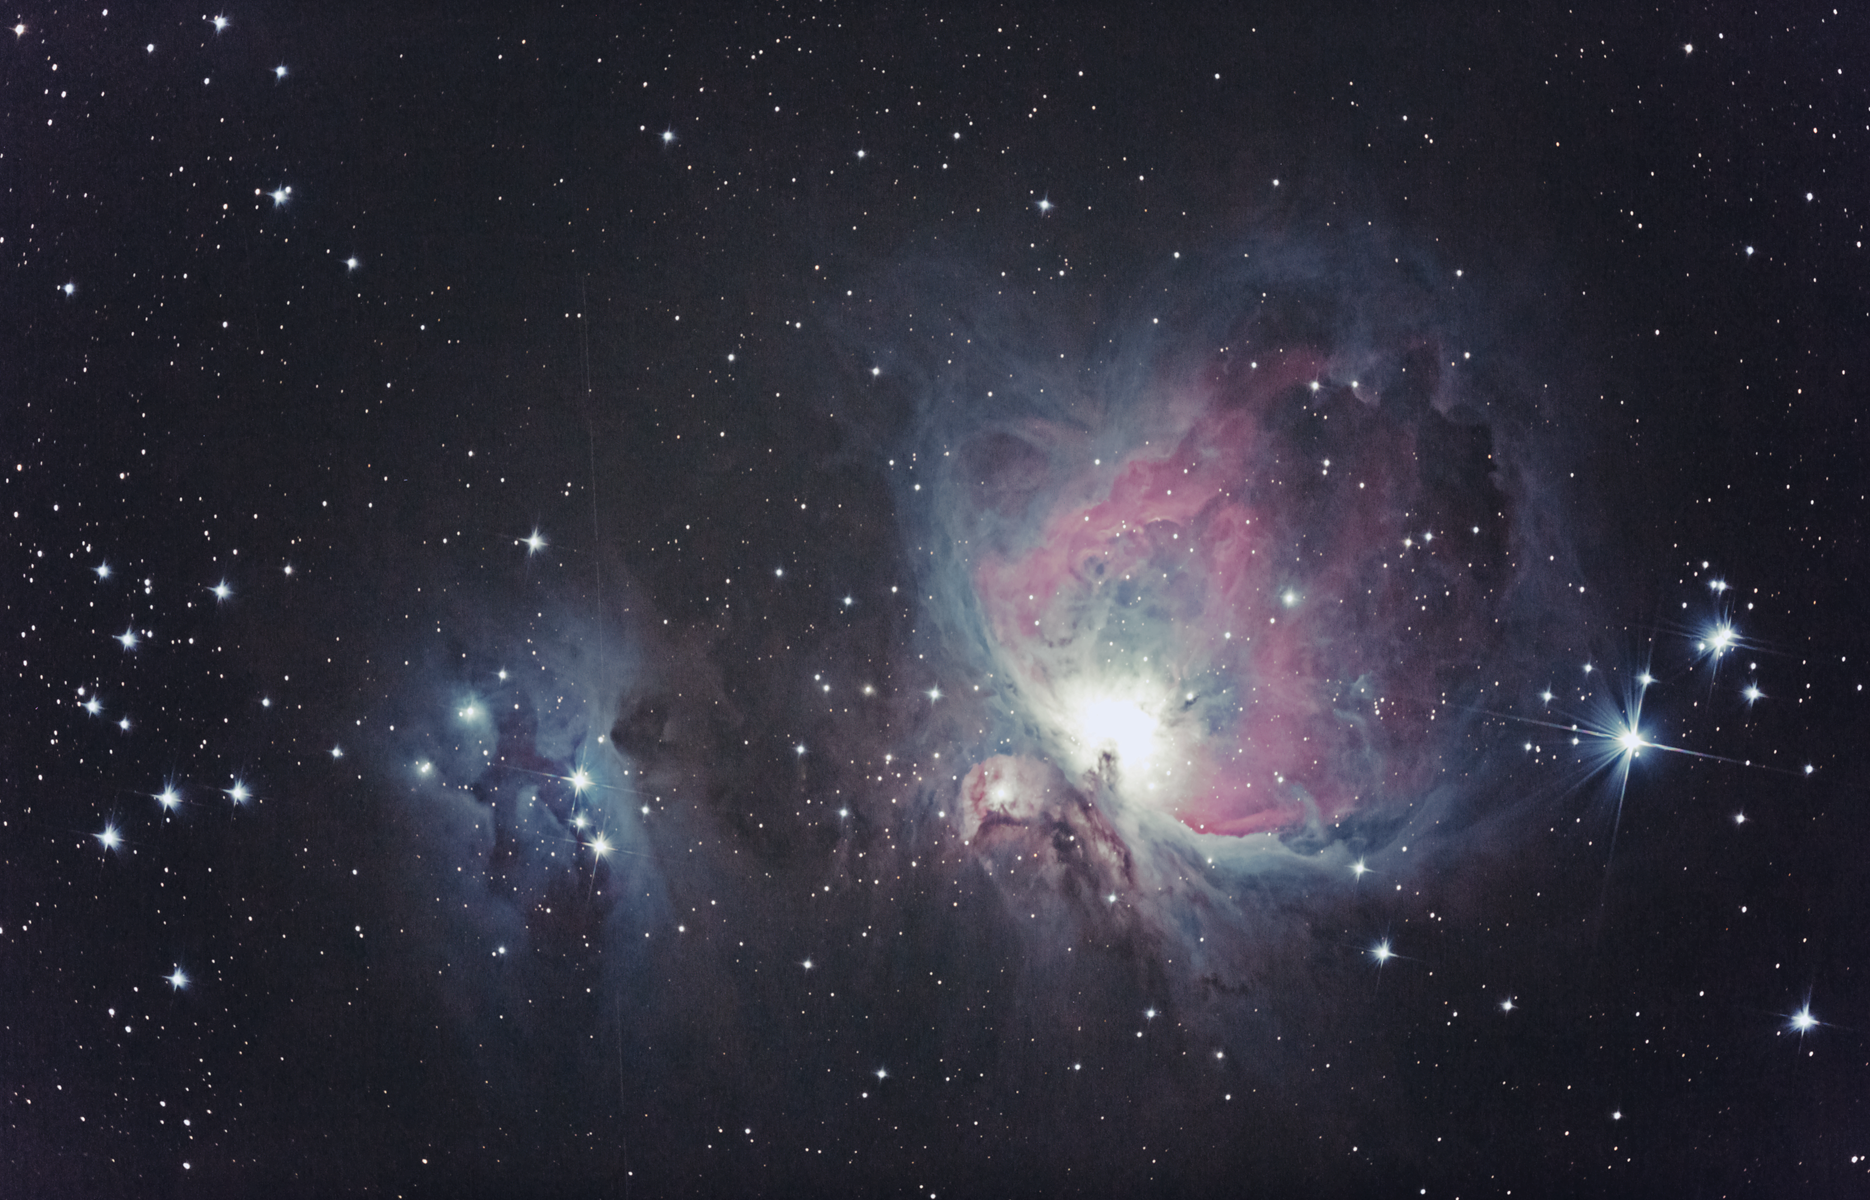 m42b-4_副本_副本_副本.png